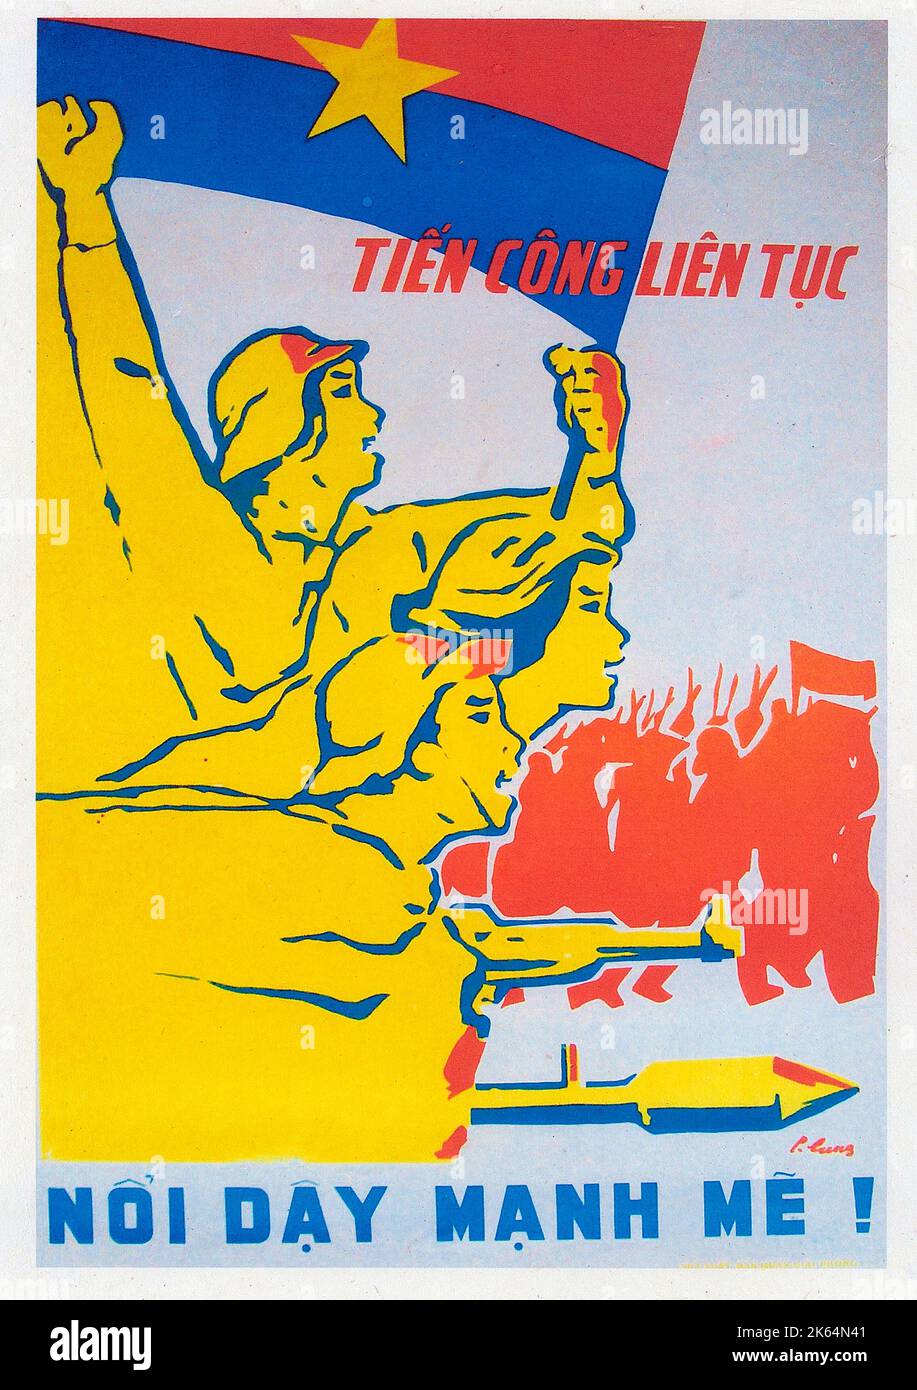 Vietnamese Patriotic Poster - 'Keep Attacking!' - 'Shout this loudly!' Stock Photo